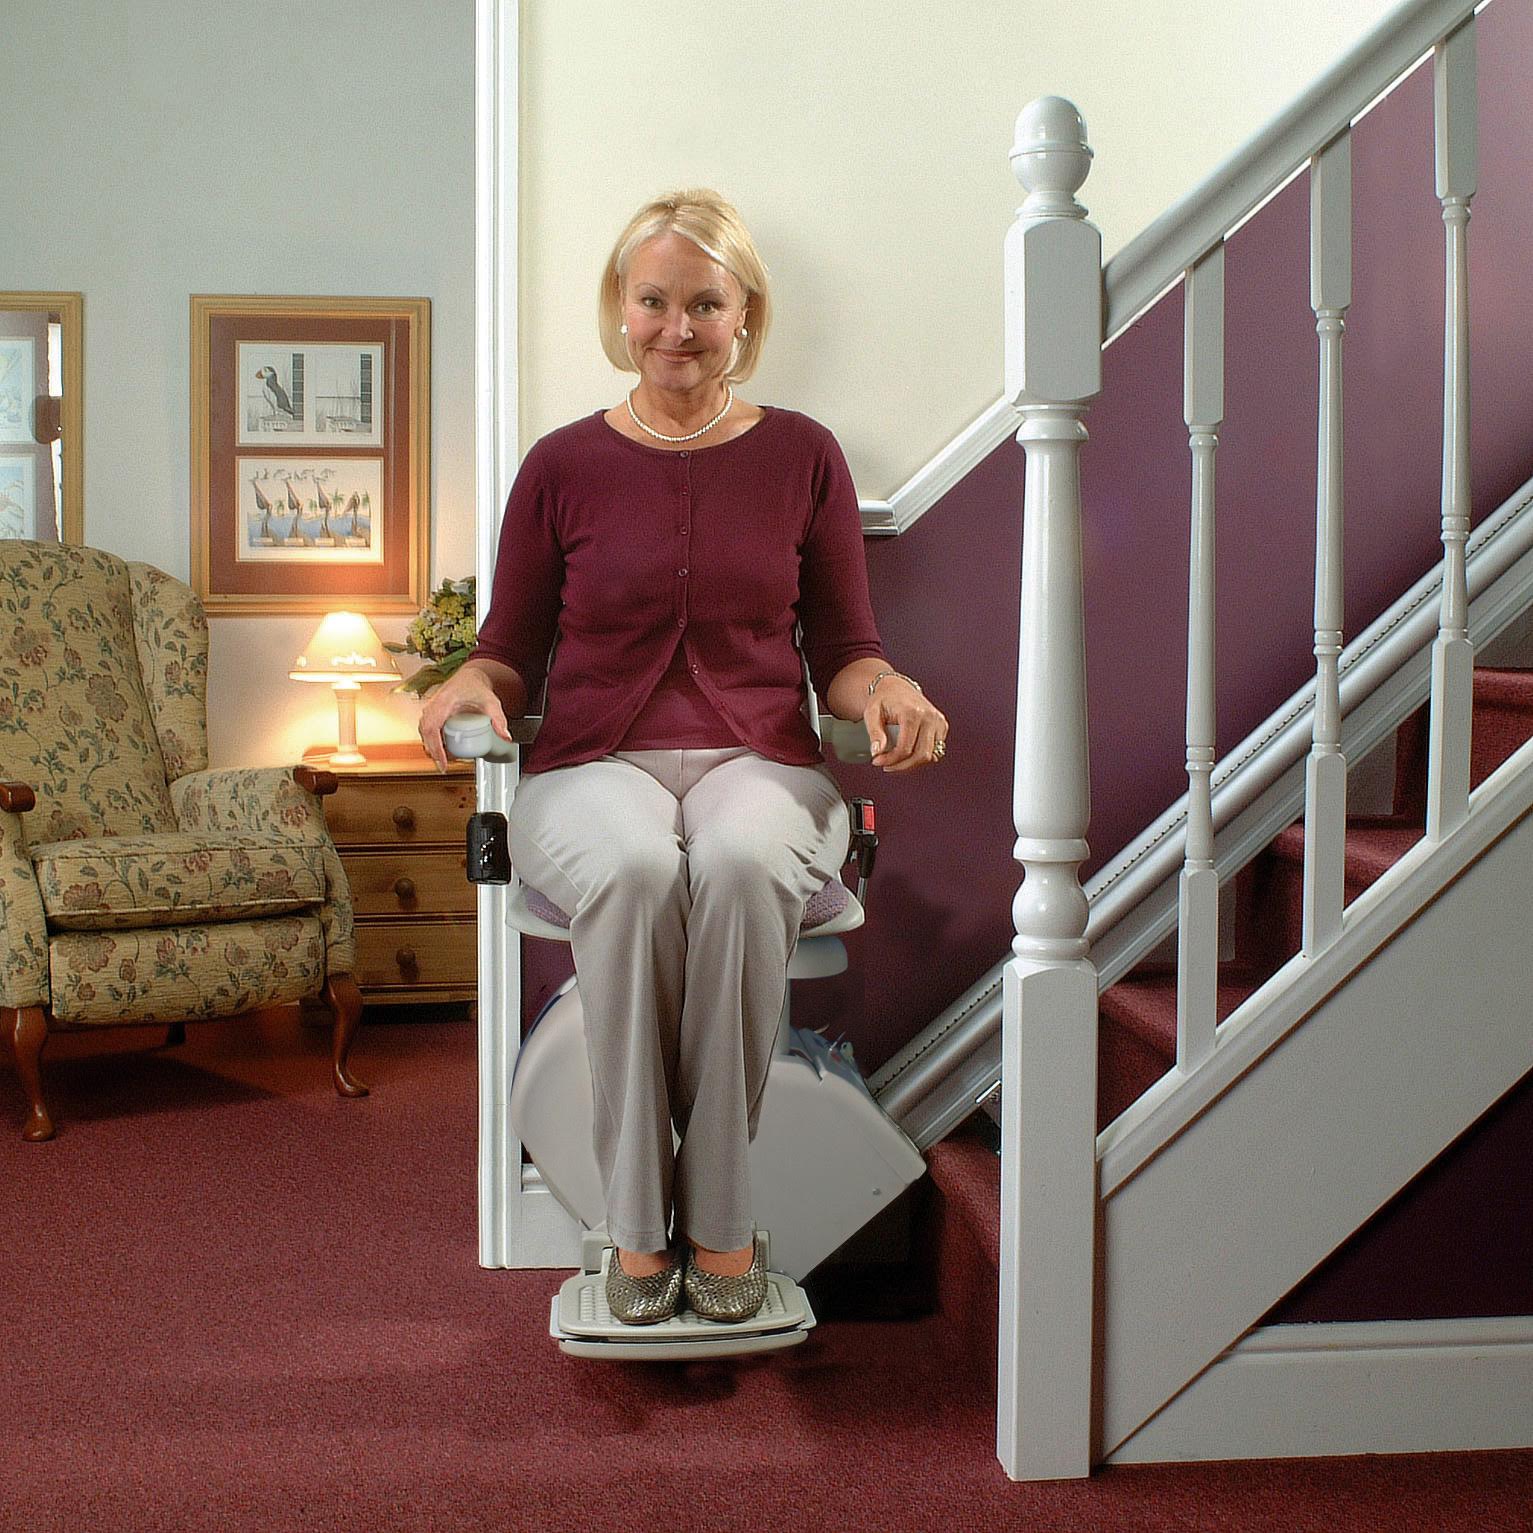 Carson curved stair lift chair for elderly